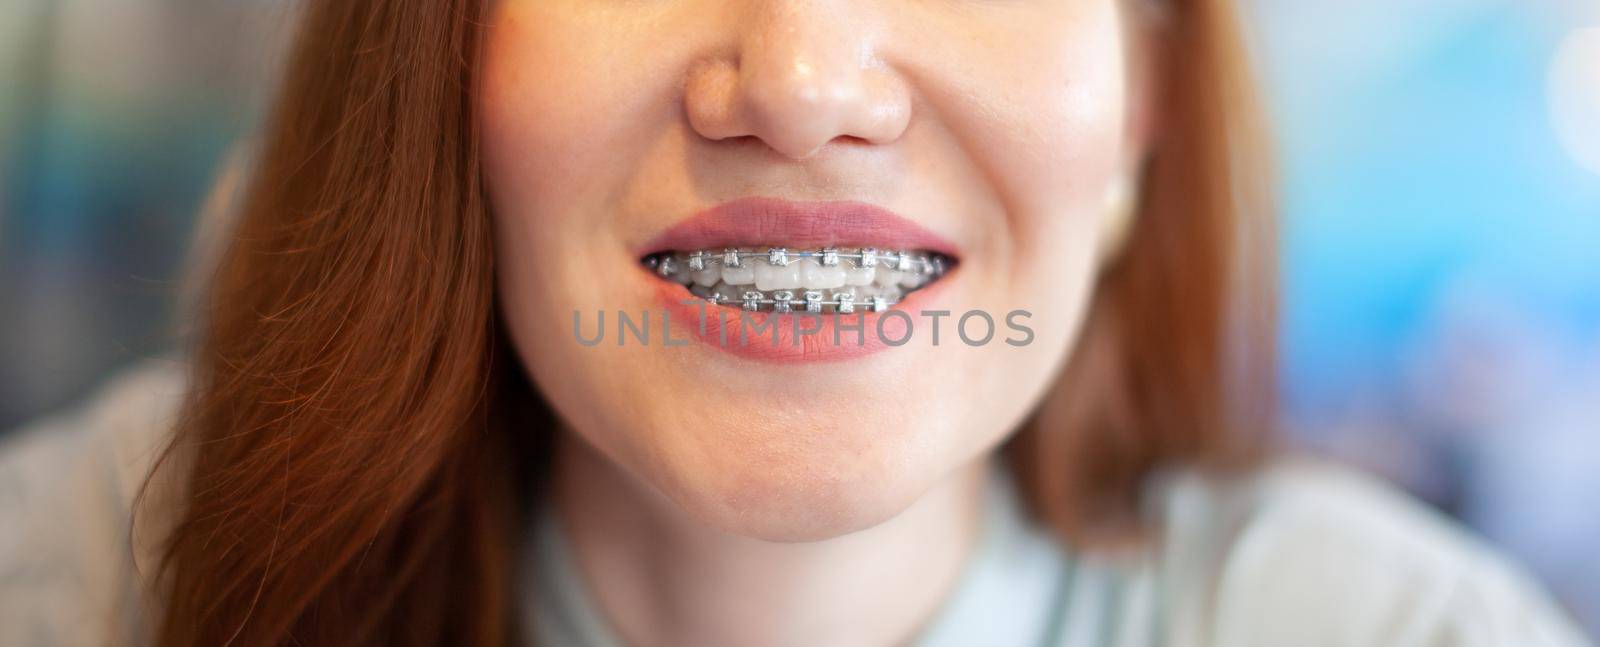 The smile of a young girl with braces on her white teeth.  by AnatoliiFoto